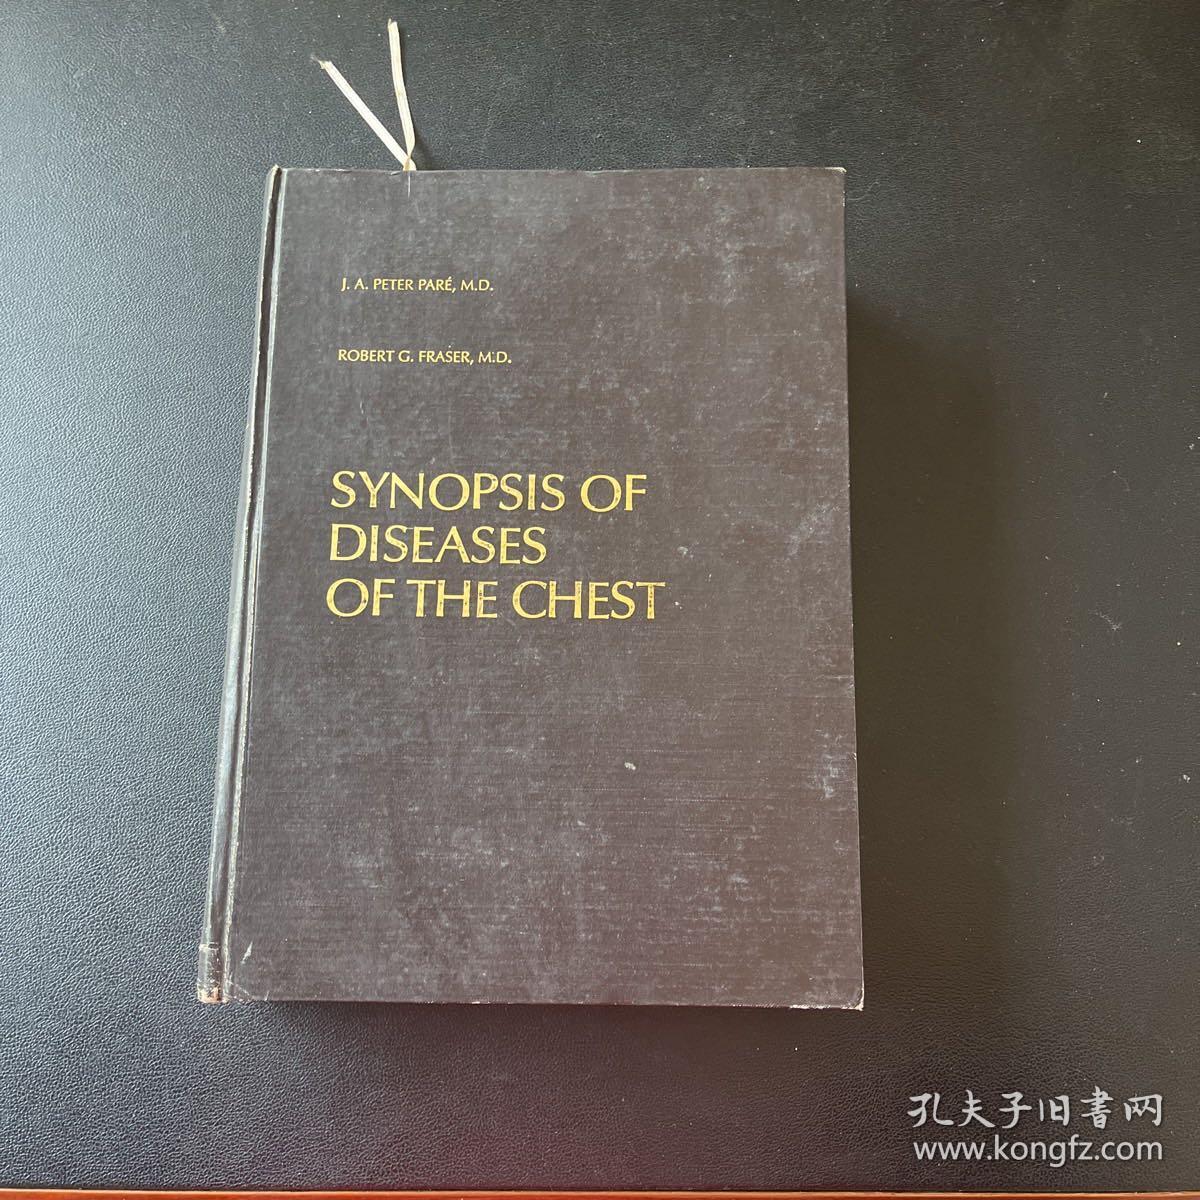 SYNOPSIS OF DISEASES OF THE CHEST